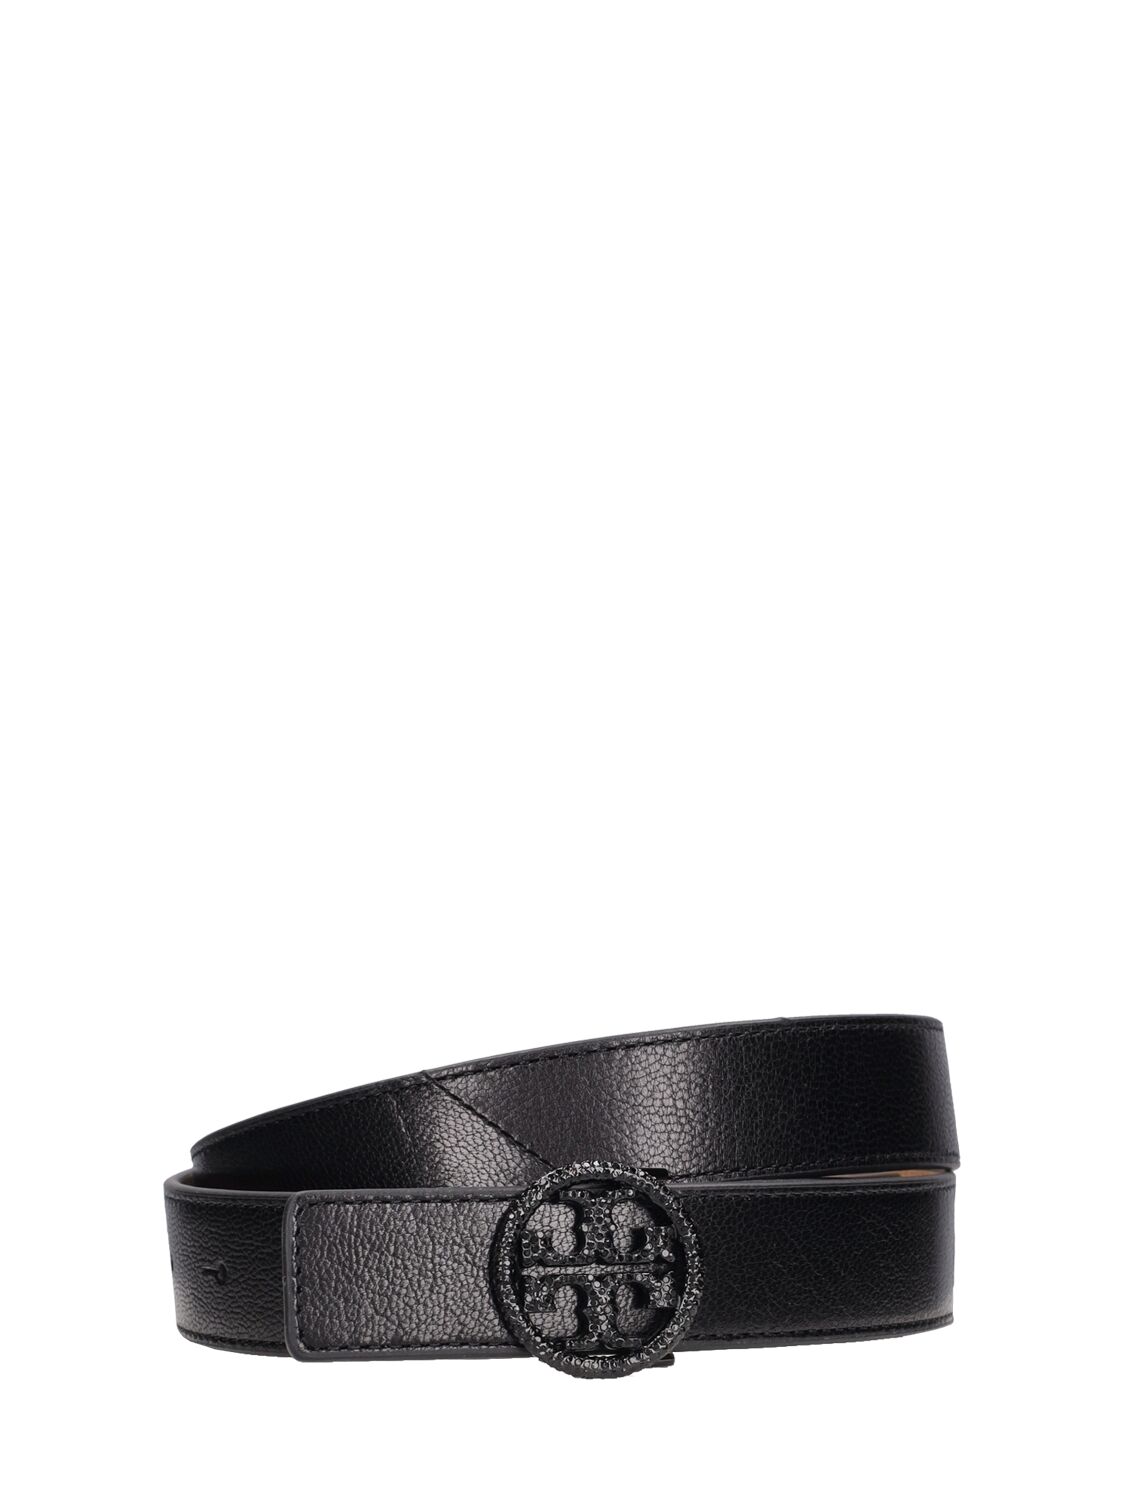 Tory Burch Miller Crystal Embellished Leather Belt In Perfect Black